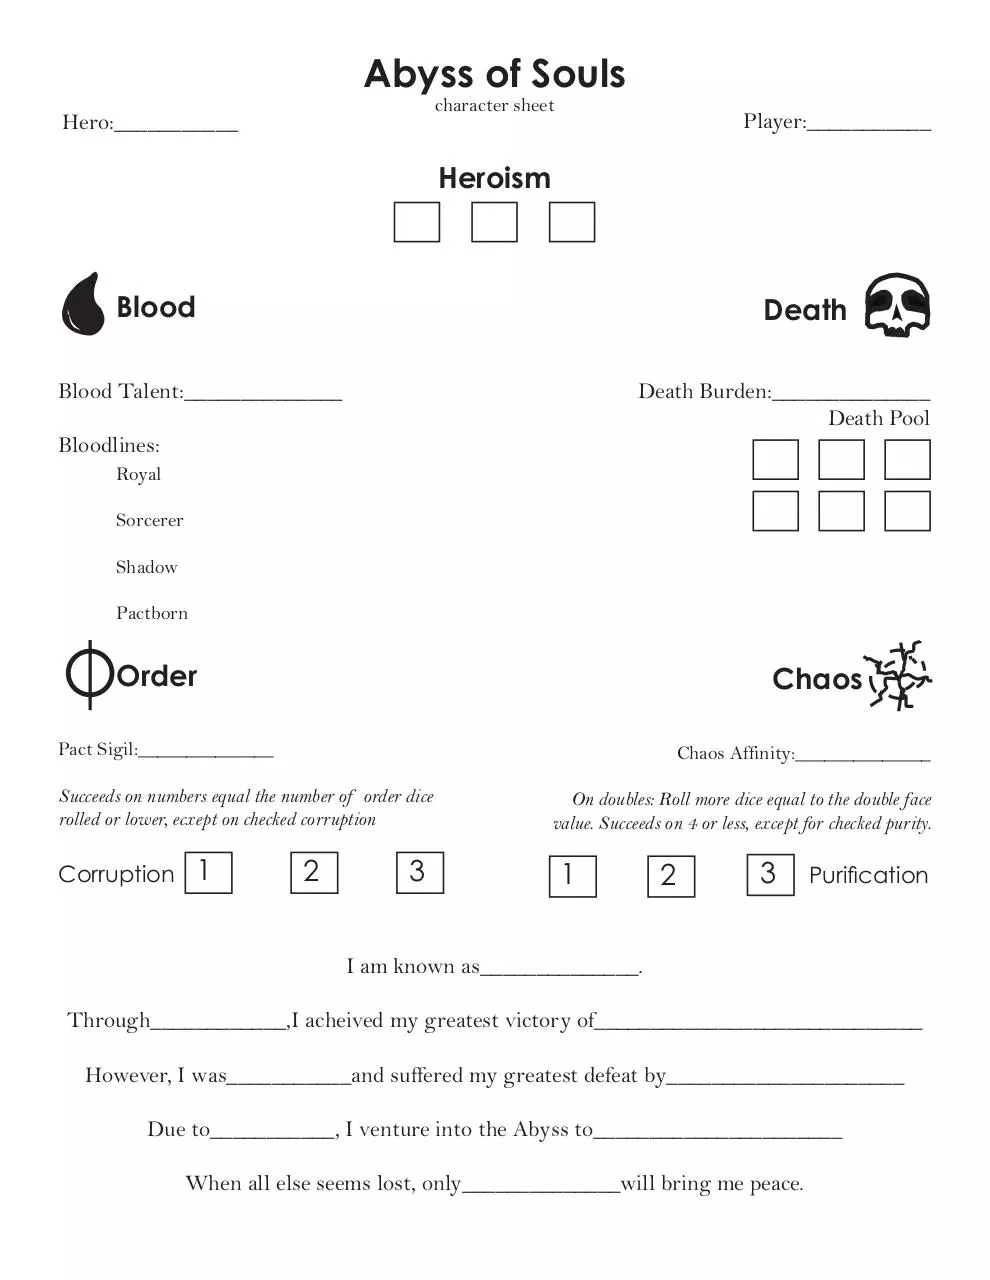 Document preview - Abyss character sheet alternate 1.pdf - Page 1/1